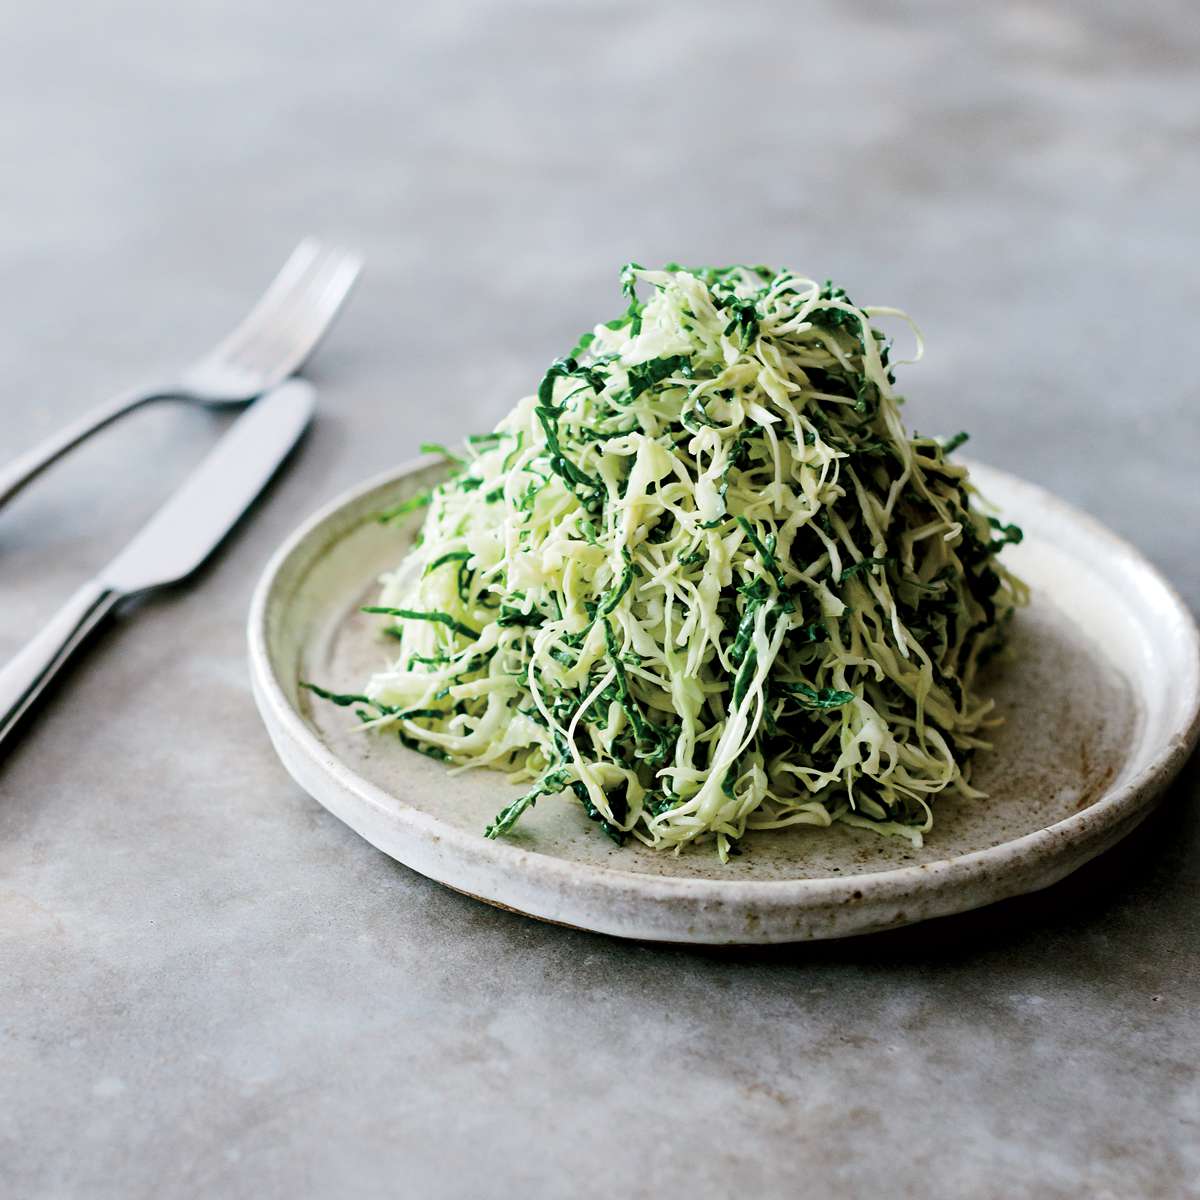 Cabbage-and-Kale Slaw with Toasted Yeast Dressing Recipe - Josh Lewis |  Food & Wine